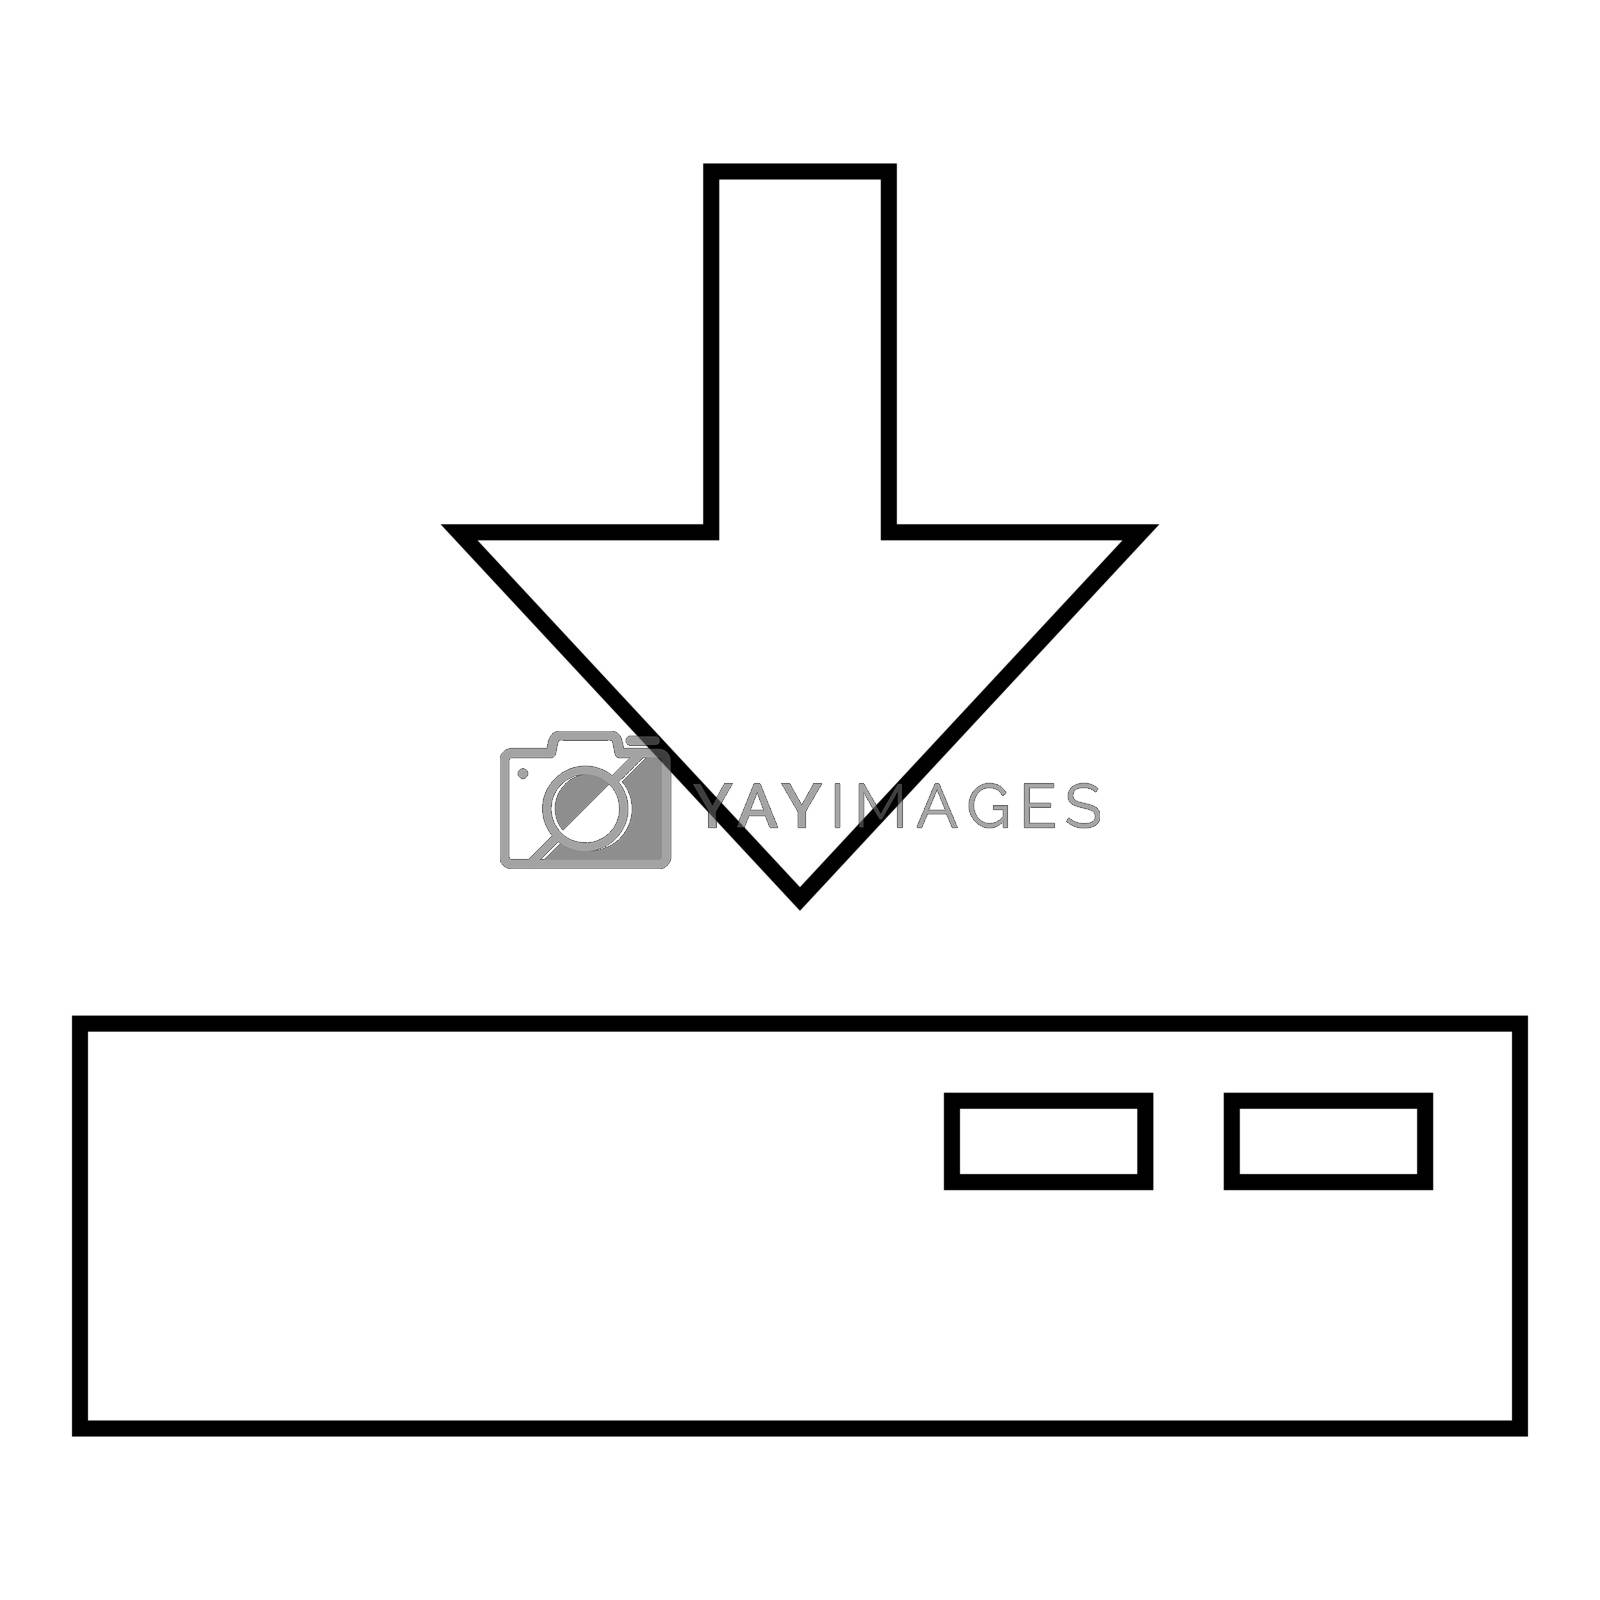 Royalty free image of Download to server icon black color illustration flat style simple image by serhii435